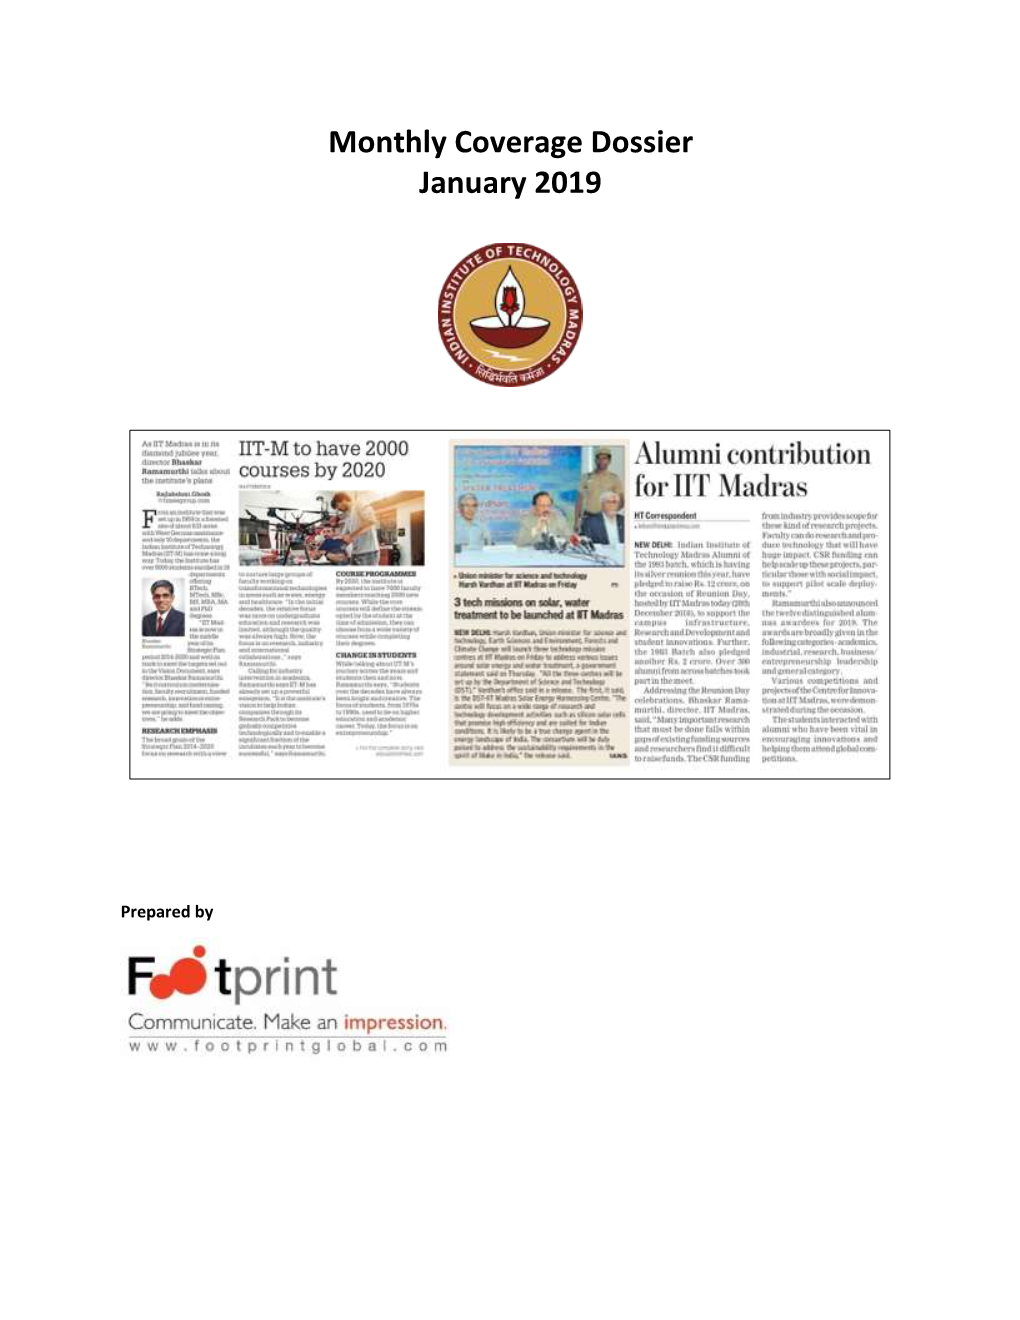 Monthly Coverage Dossier January 2019